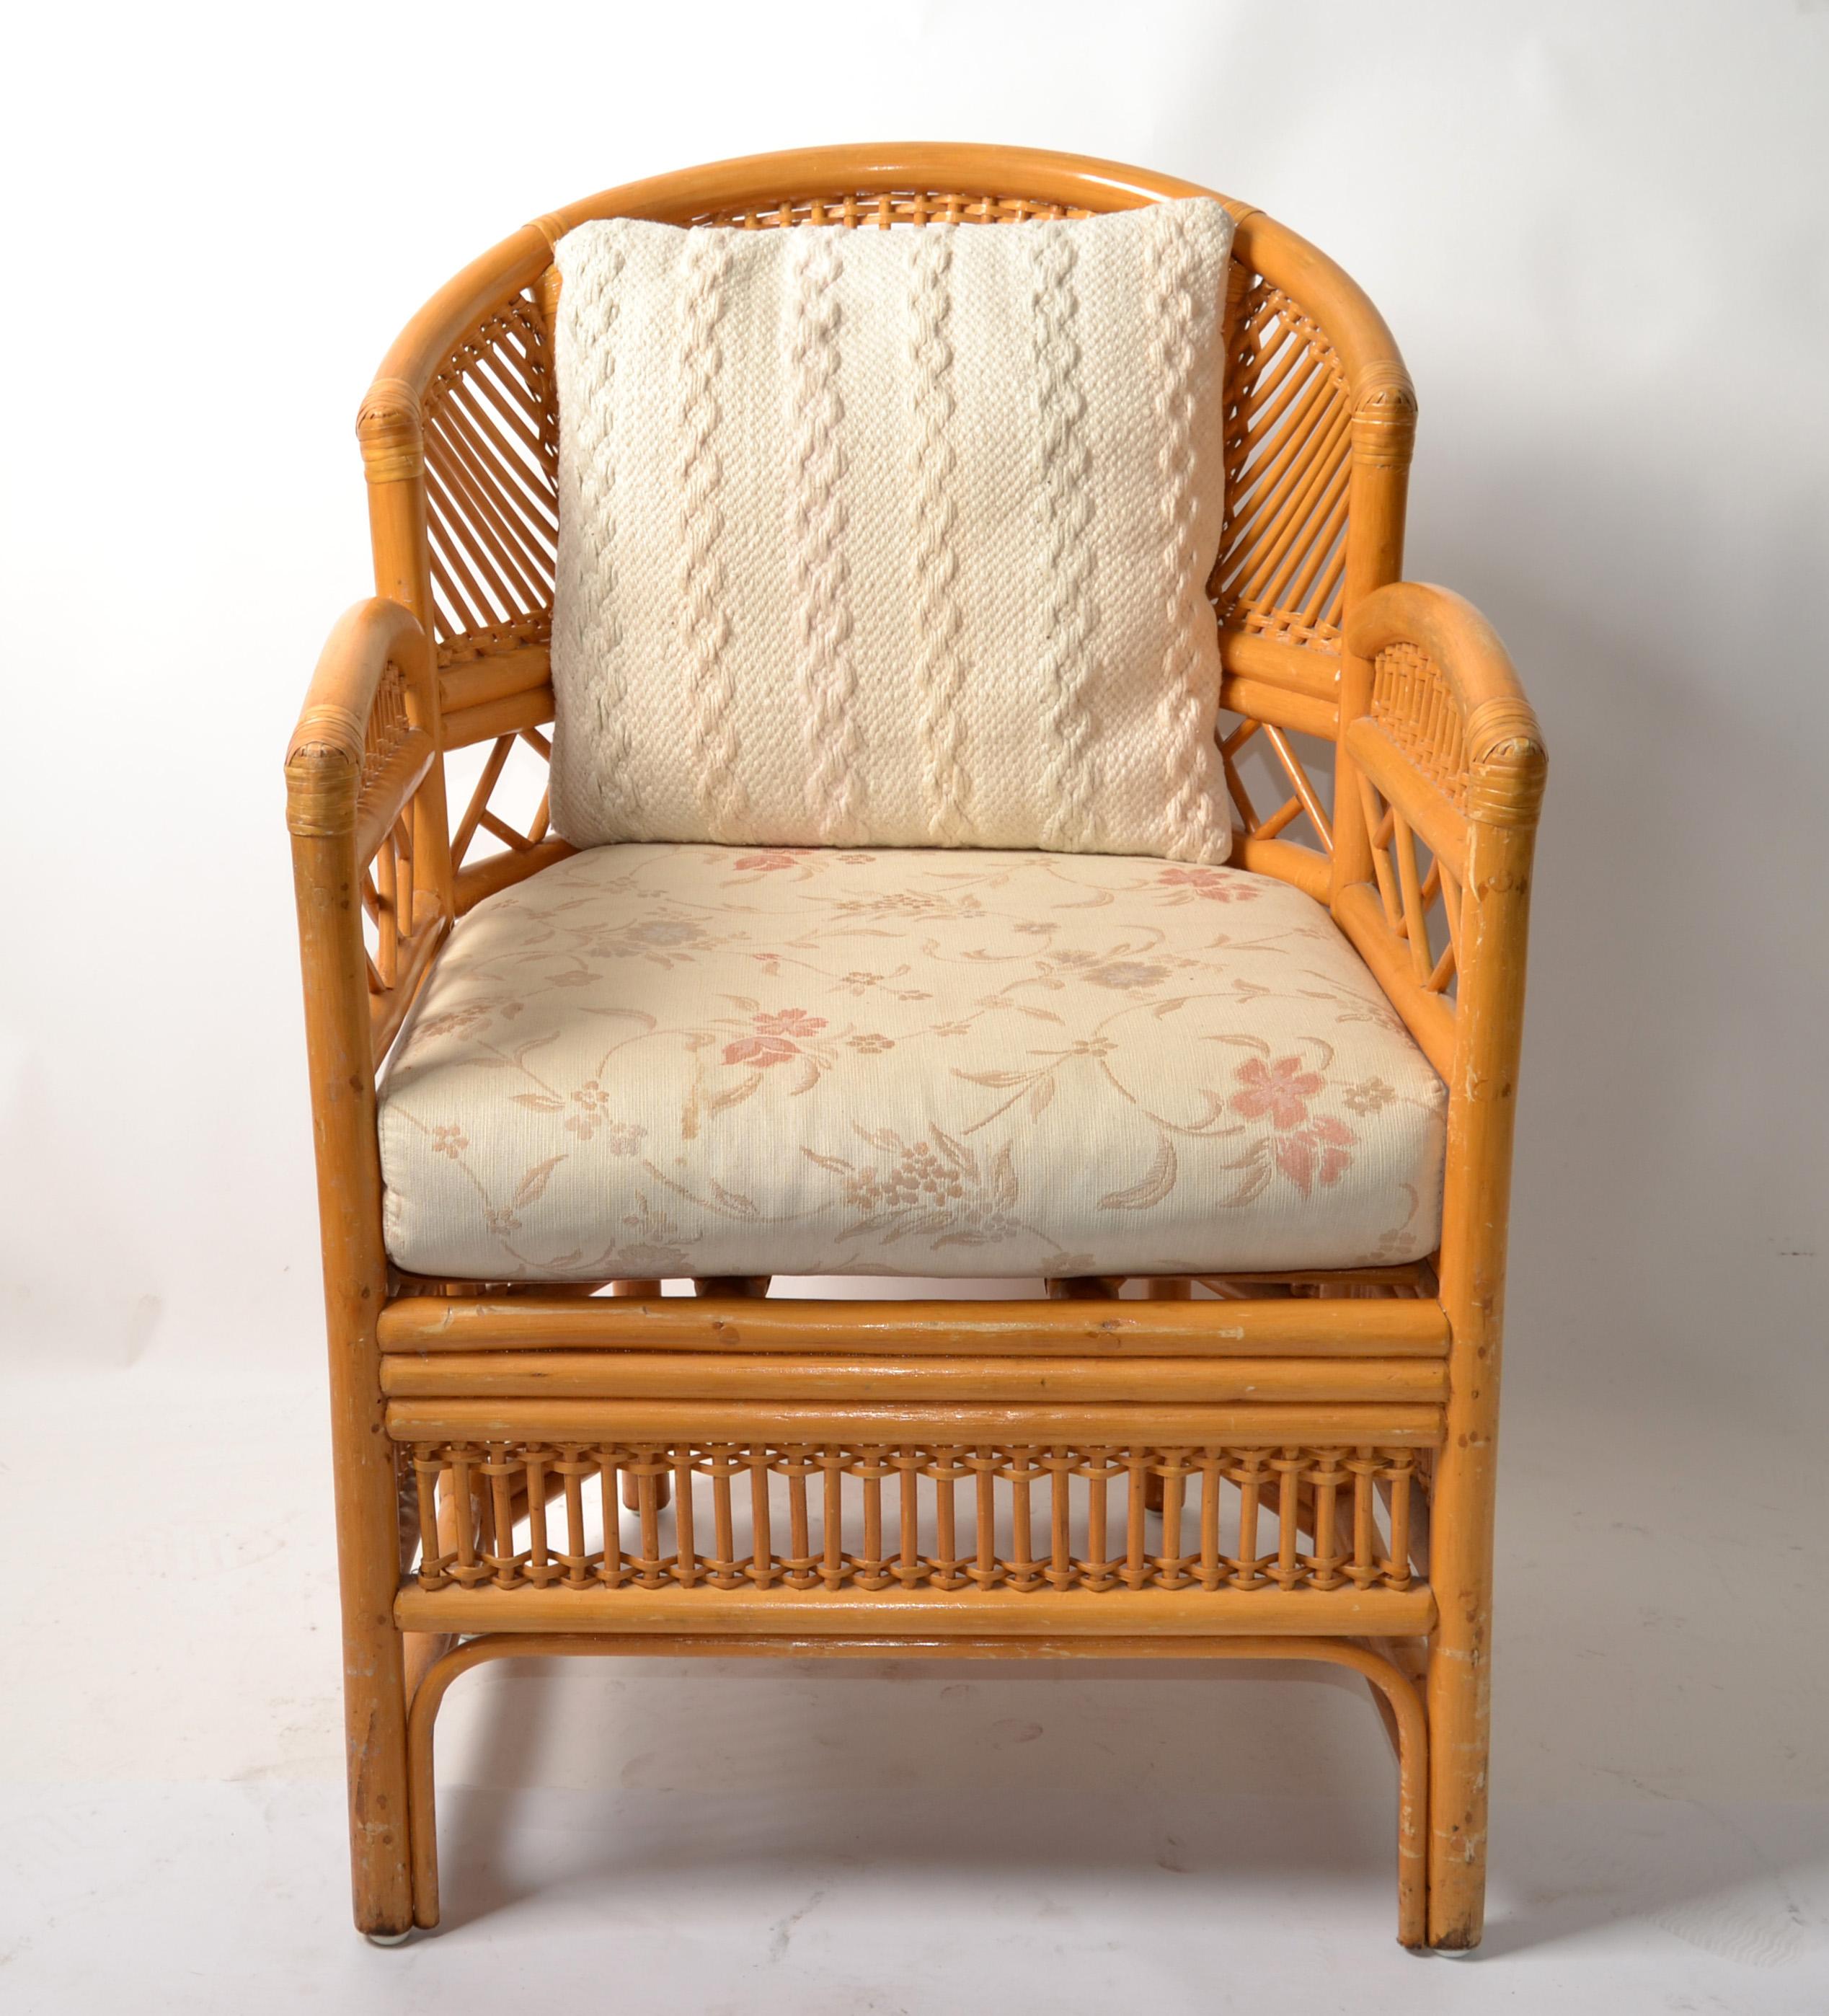 Vintage Brighton Chinoiserie Rattan Blonde Bamboo Caning Split Reed Armchair 70s For Sale 1